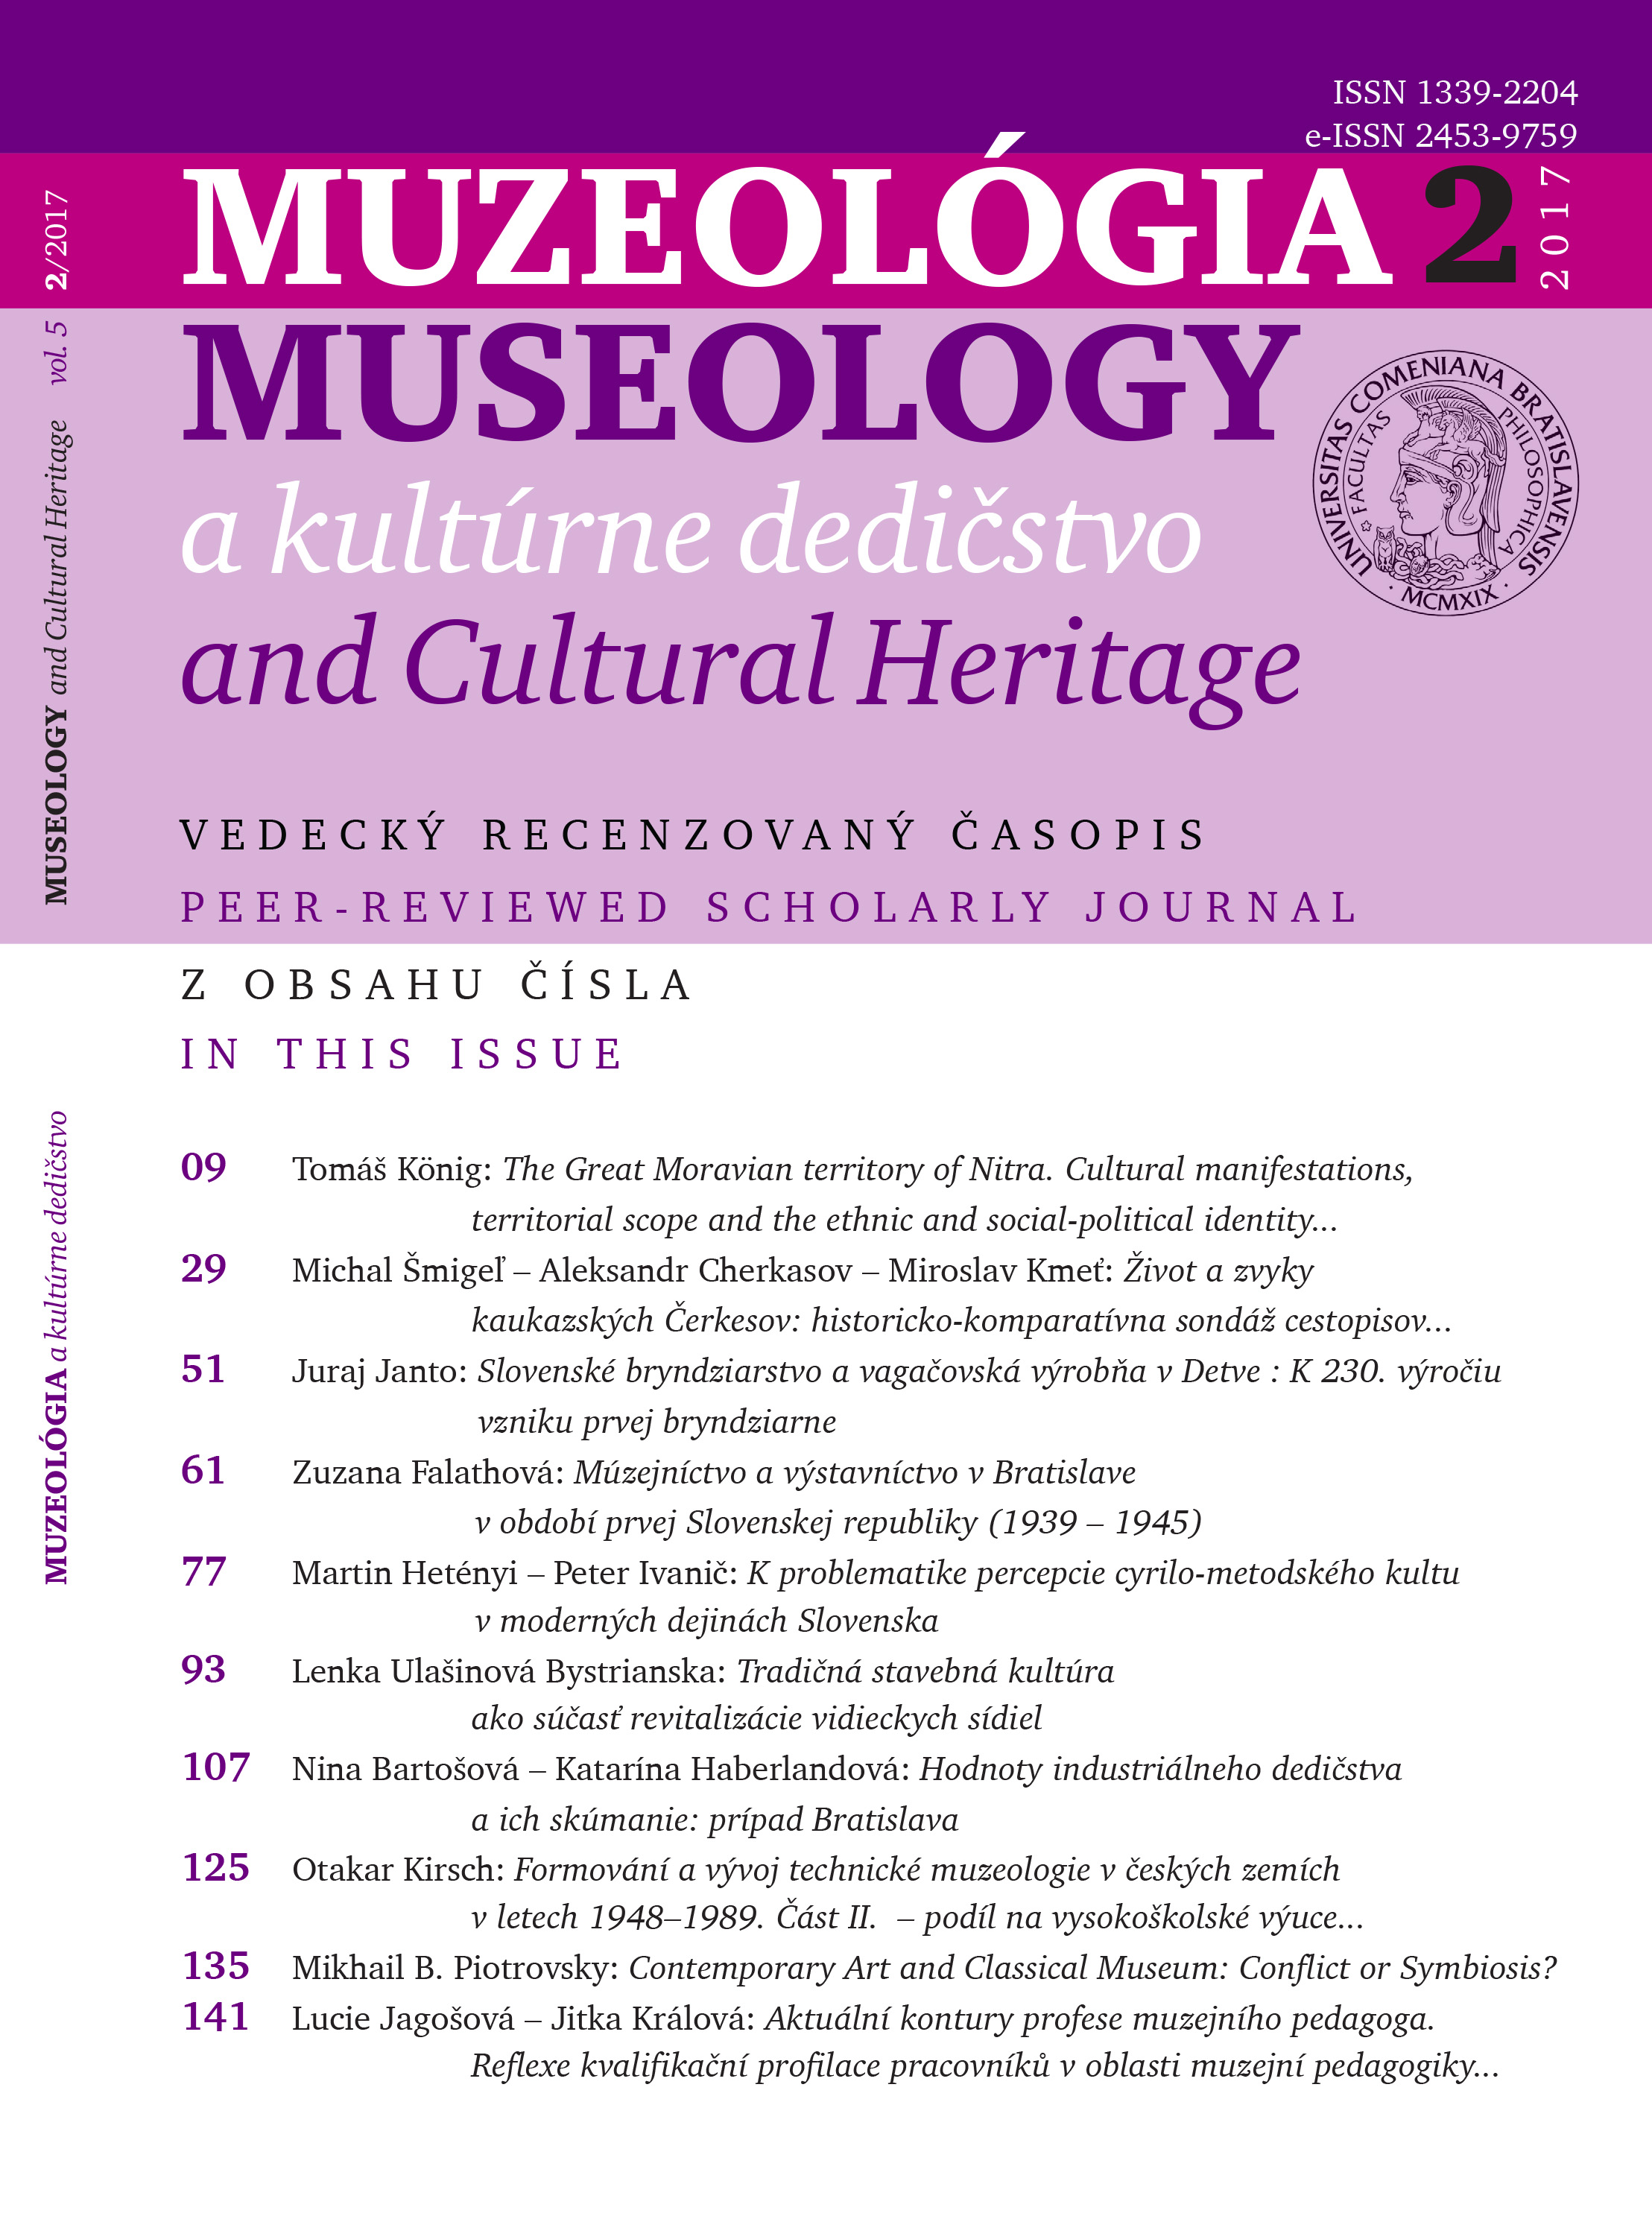 The emergence and development of  technical museology in the Czech lands between 1948 and 1989. Part II: the contribution to  university education and activities of international museum organizations, reflections of Czech  museologists Cover Image